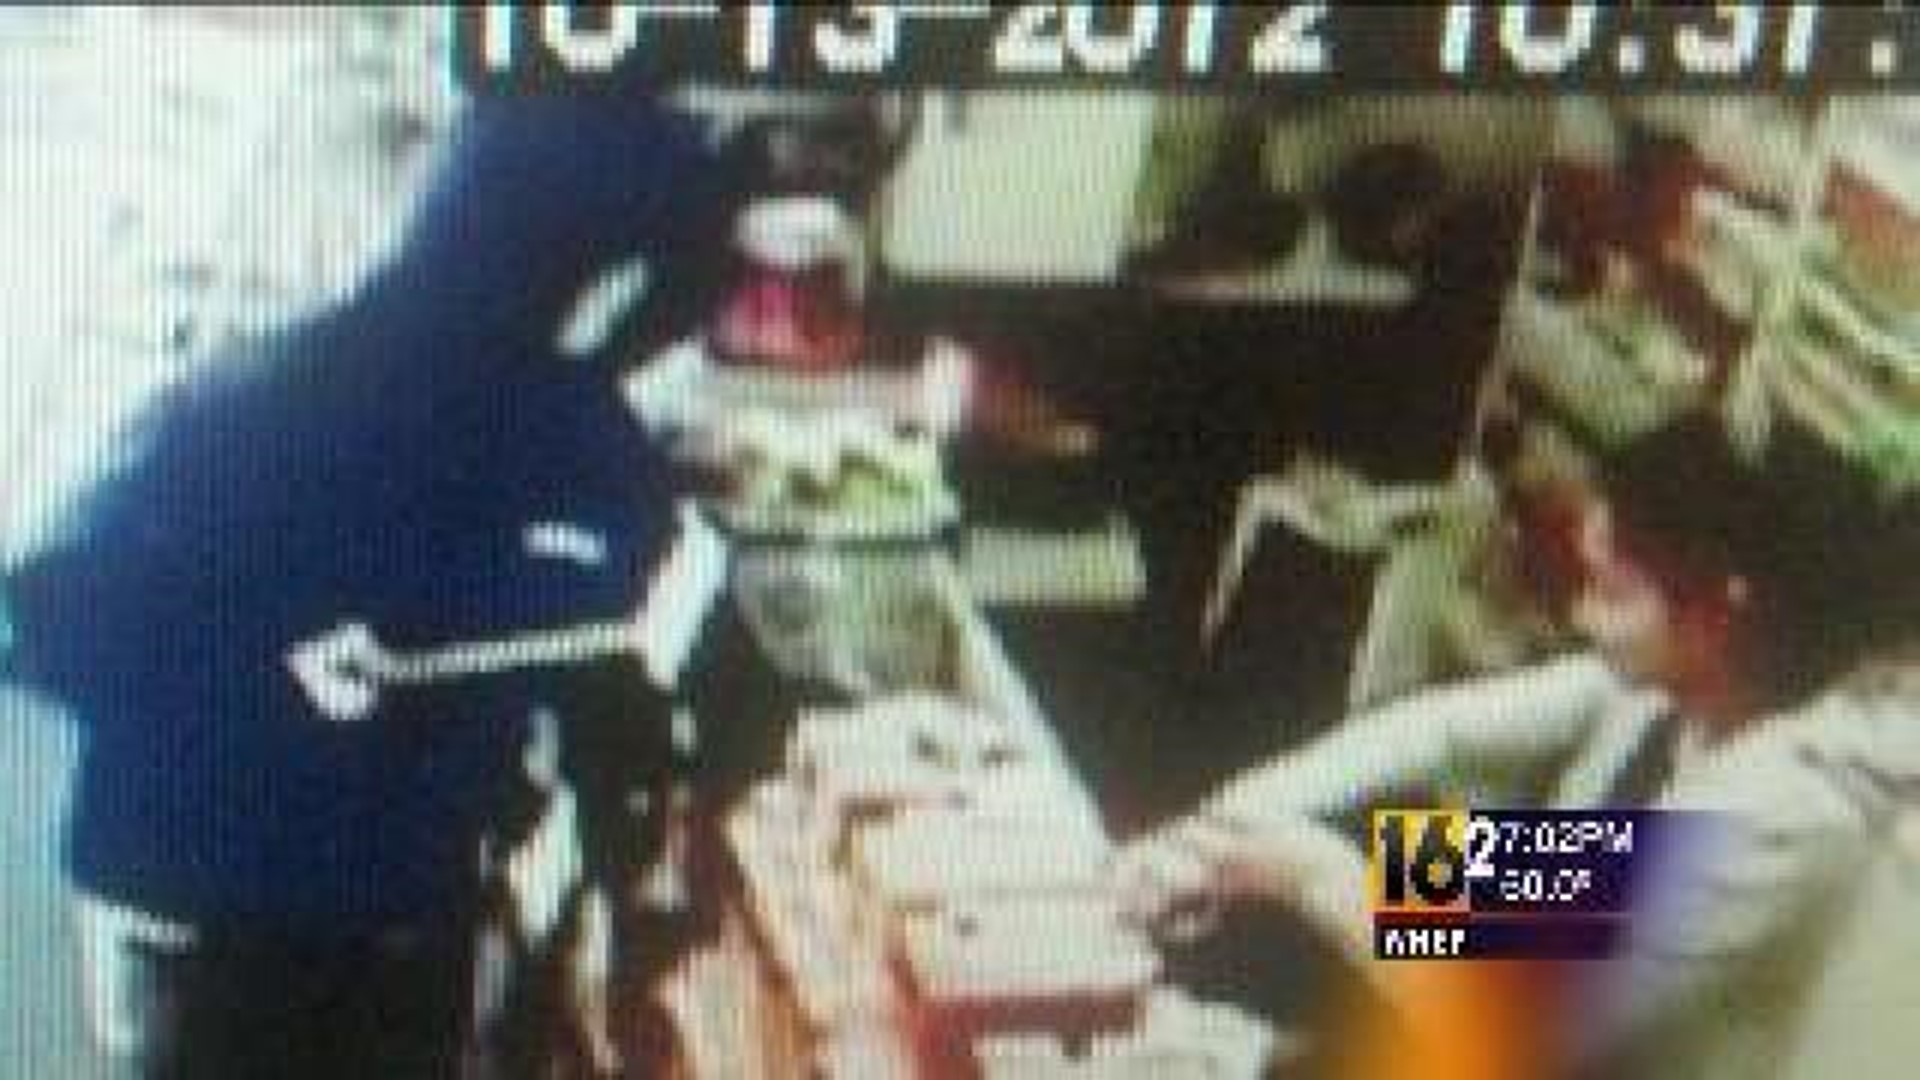 Police Search for Armed Robber